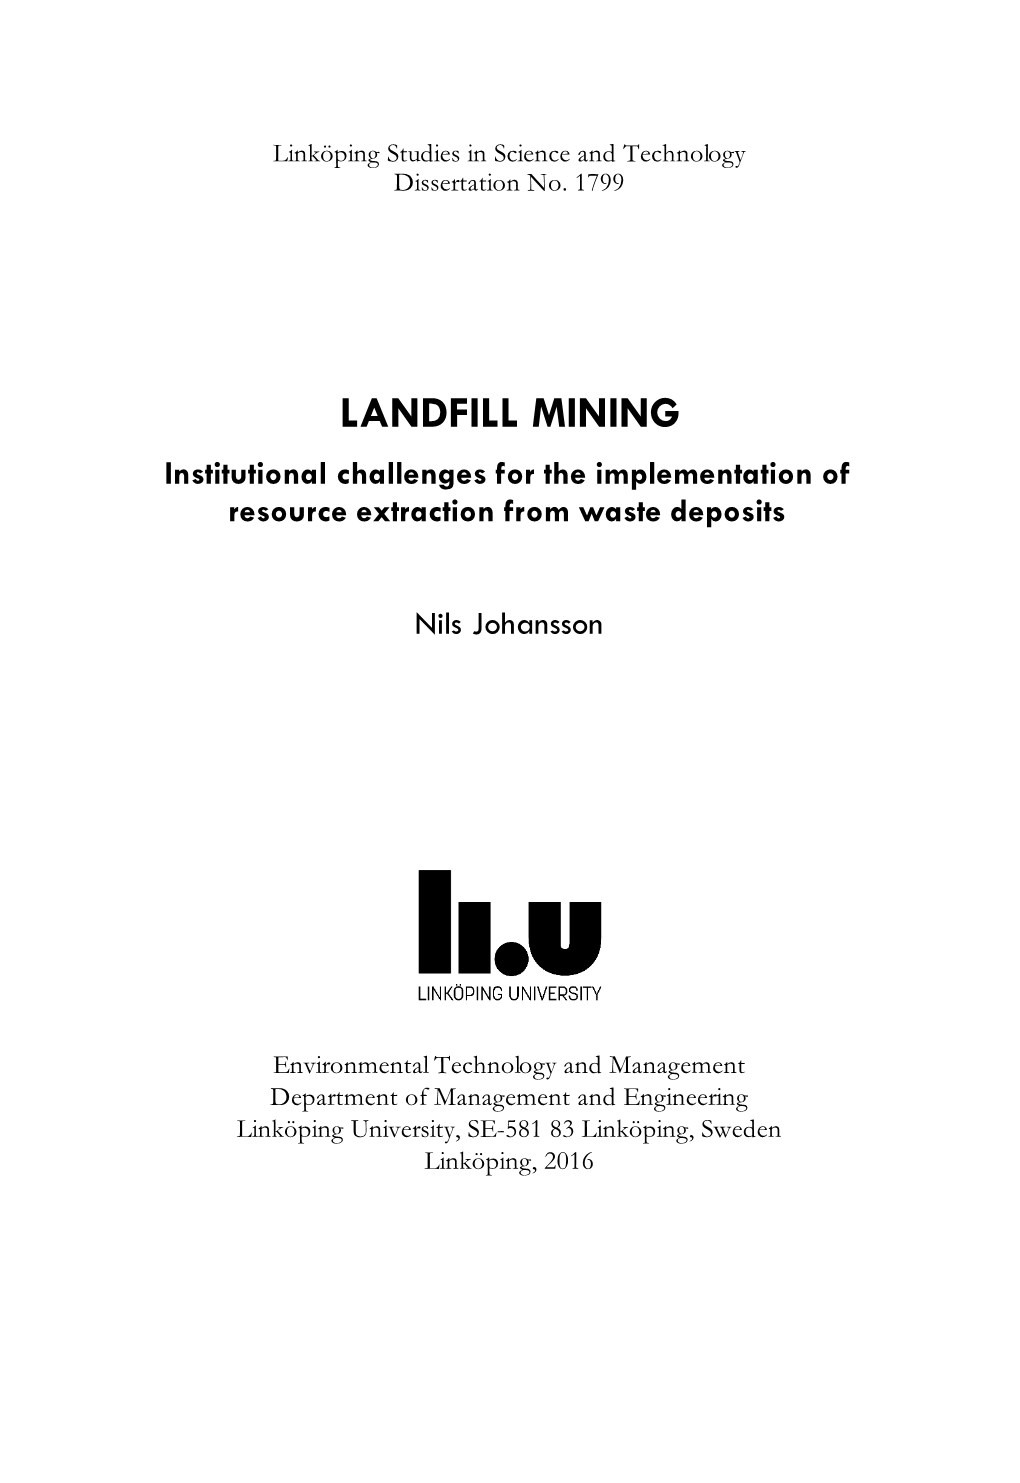 LANDFILL MINING : Institutional Challenges for the Implementation